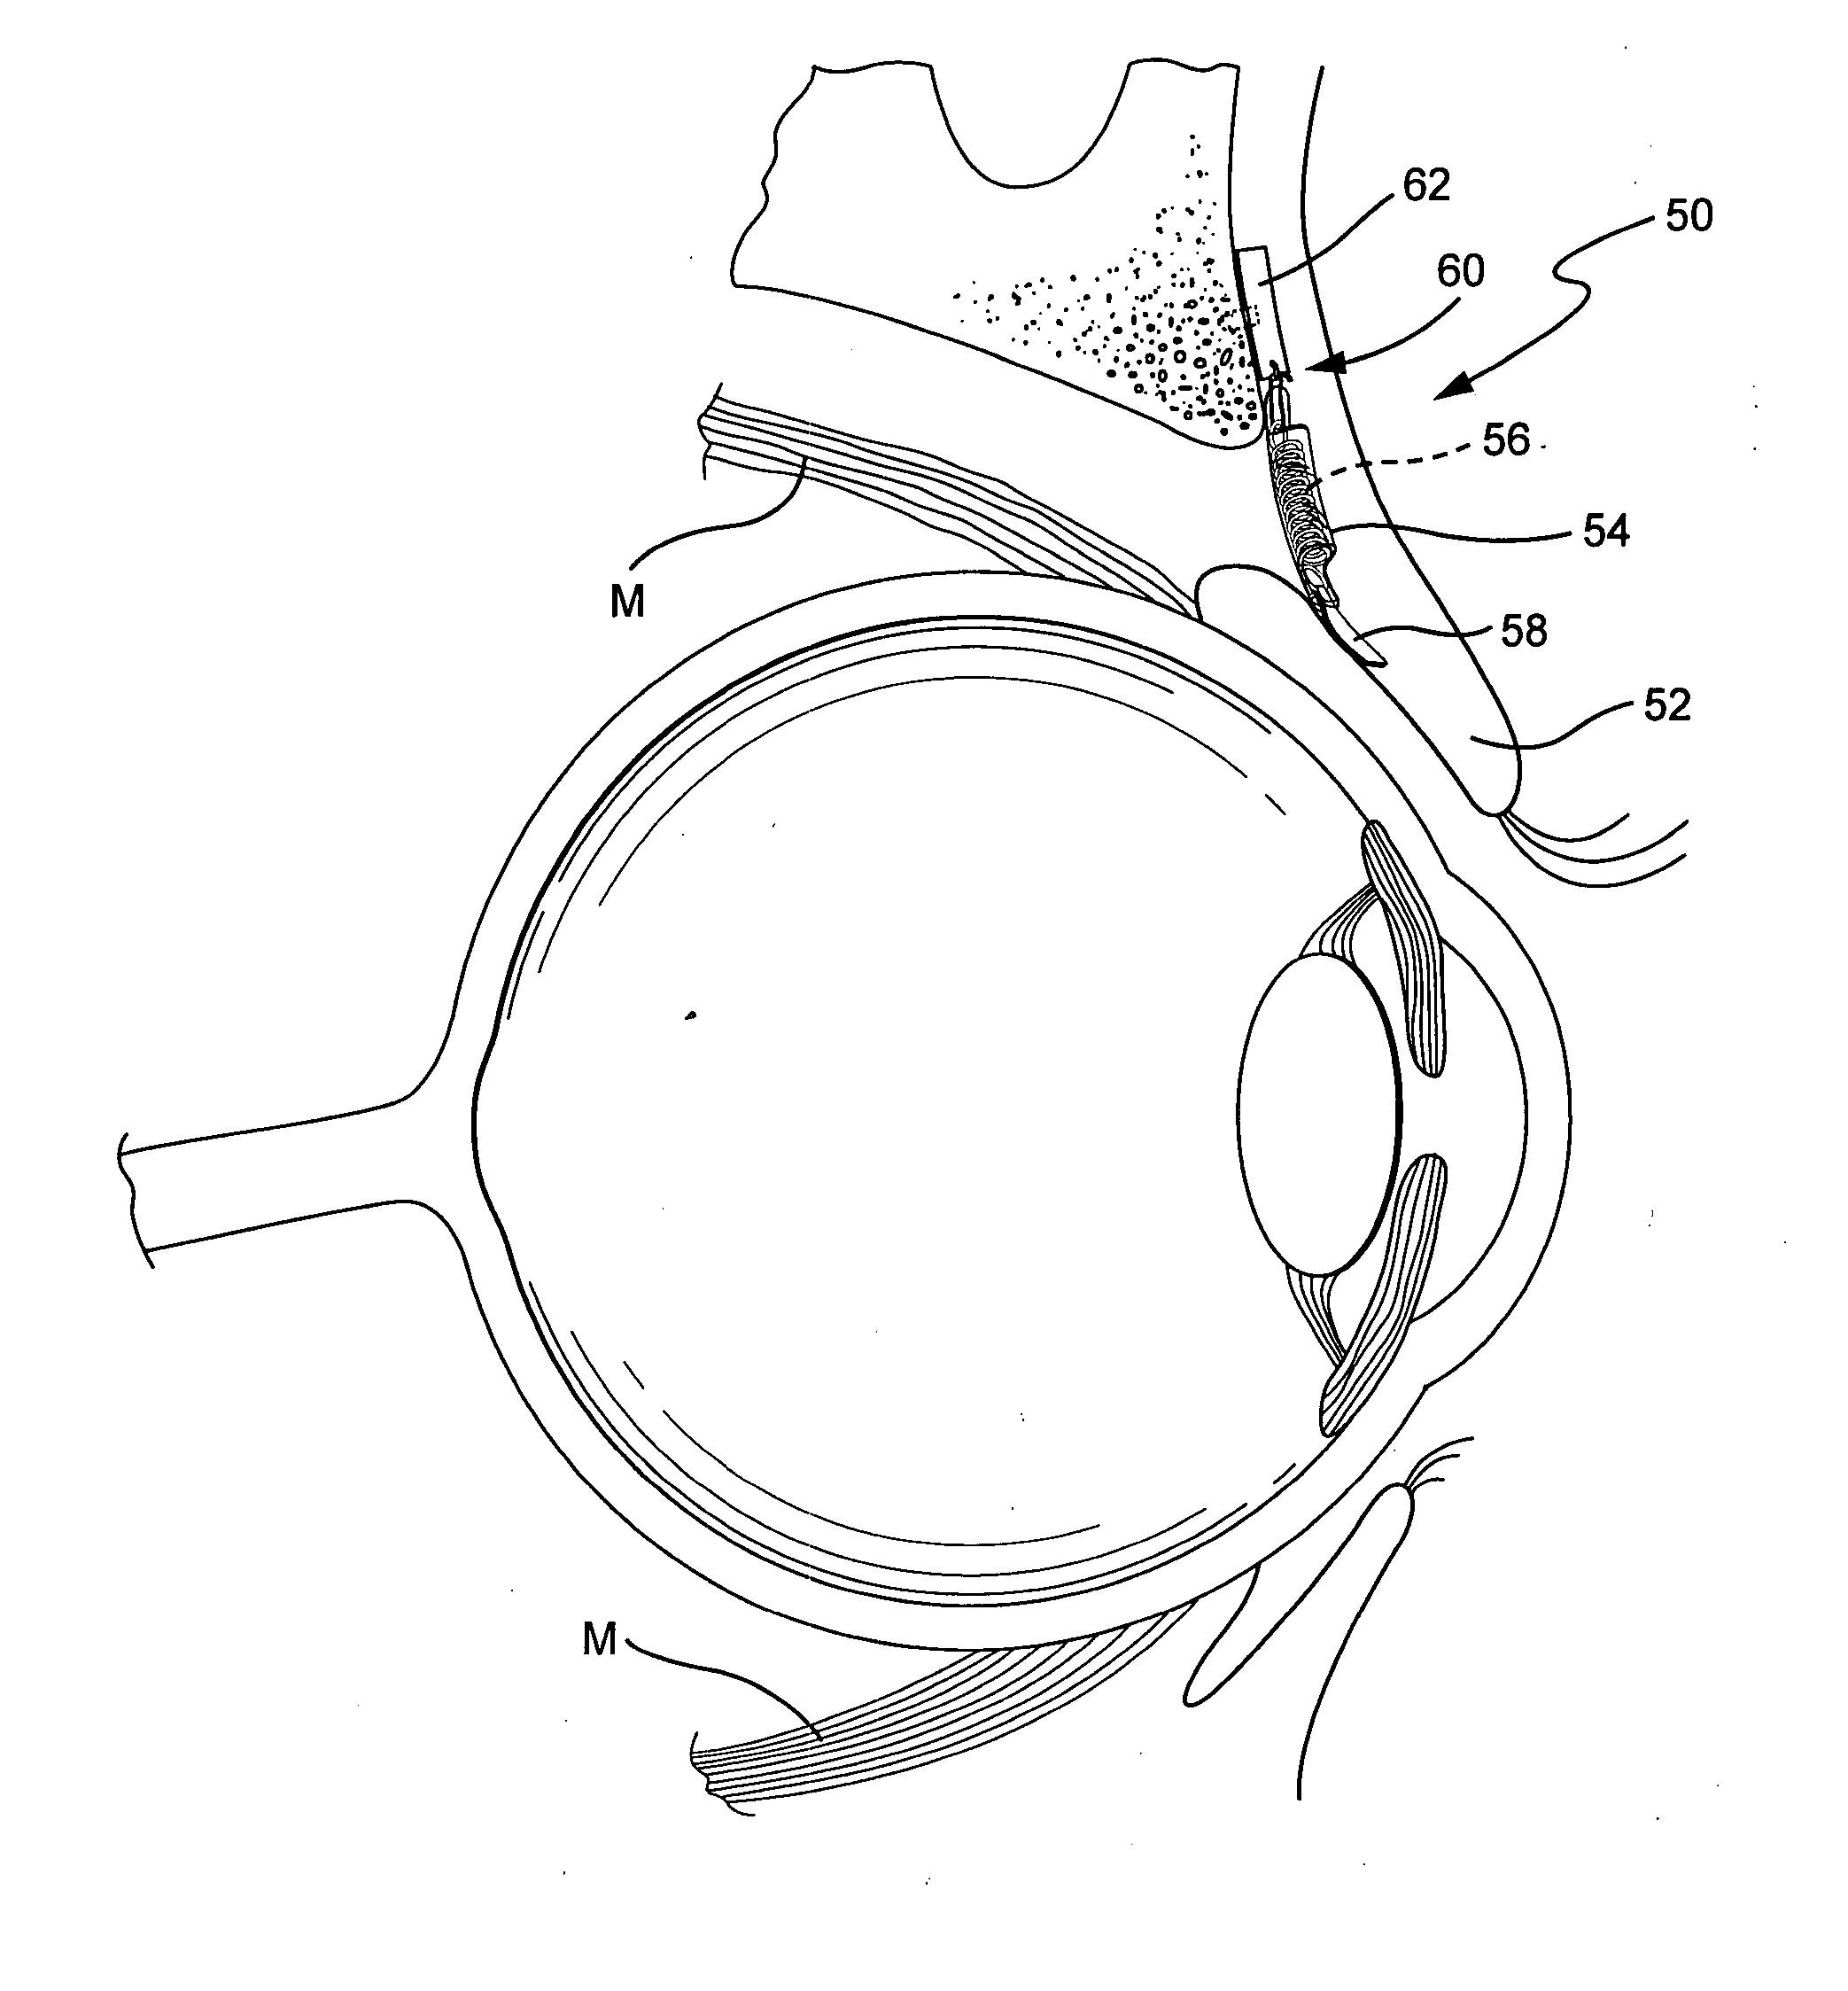 Extraocular muscle prosthesis